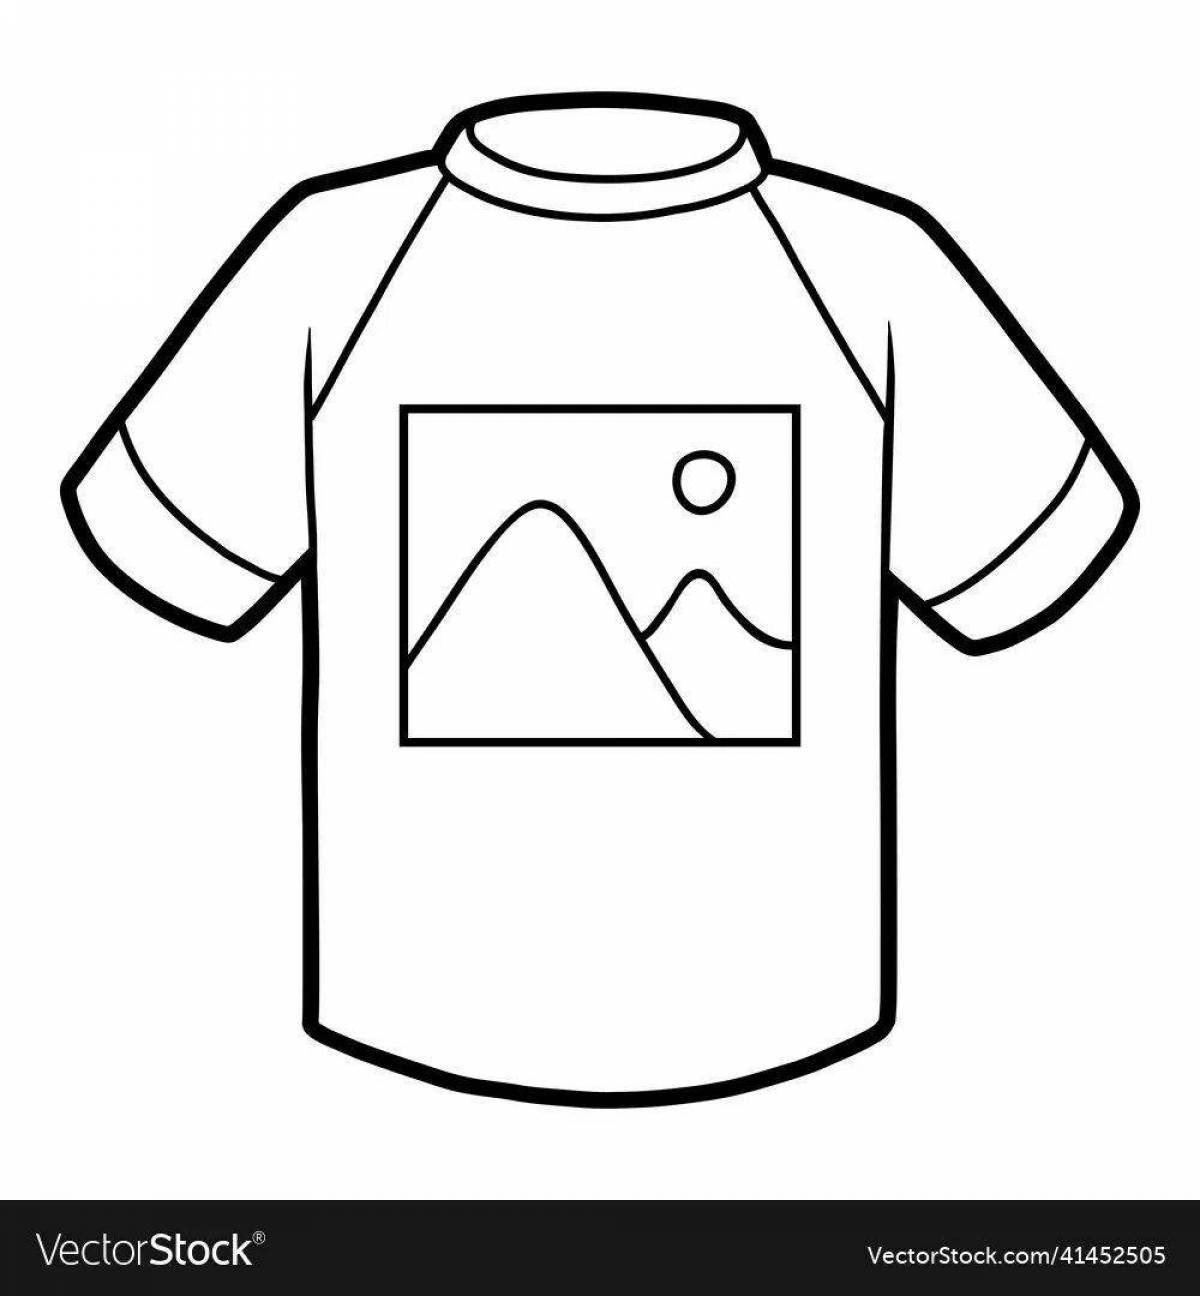 Colouring bright t-shirt for a boy